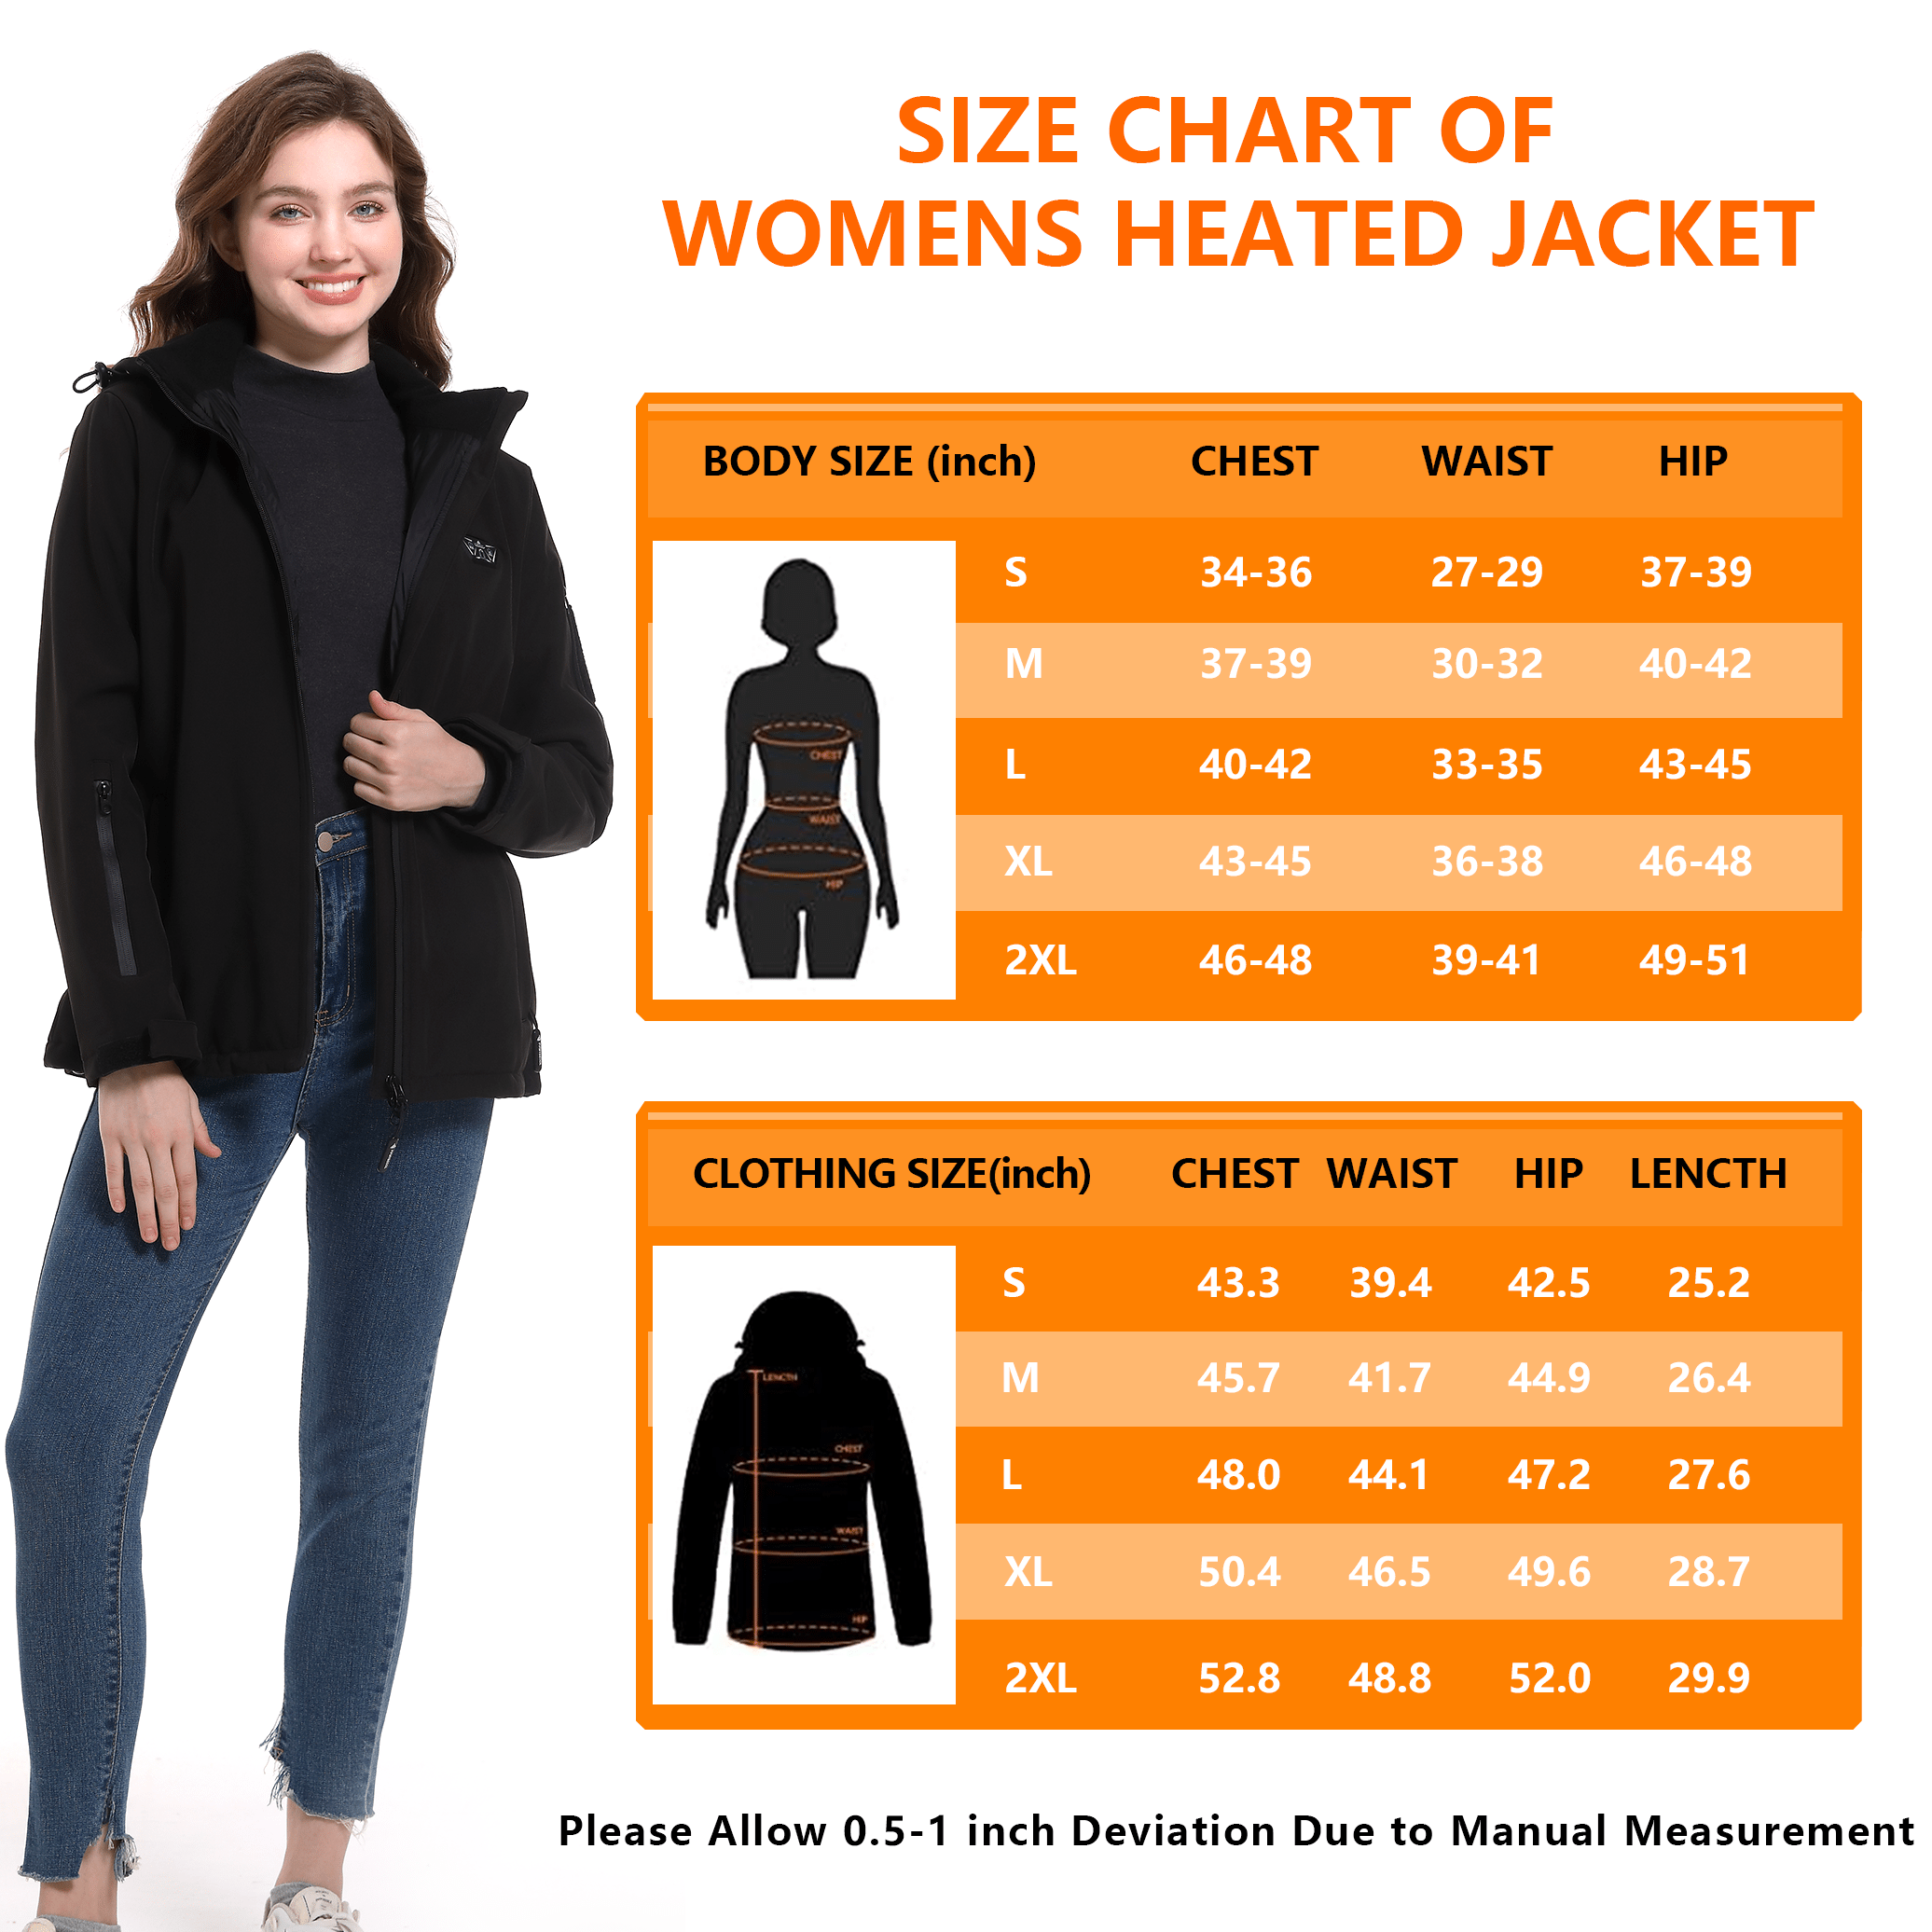 Women's Heated Jacket with 14400mAh Battery - 11-Zone Carbon Fiber Heating, - Machine Washable, Thermal Insulated Outdoor Sports Coat for Skiing, Hiking - Black